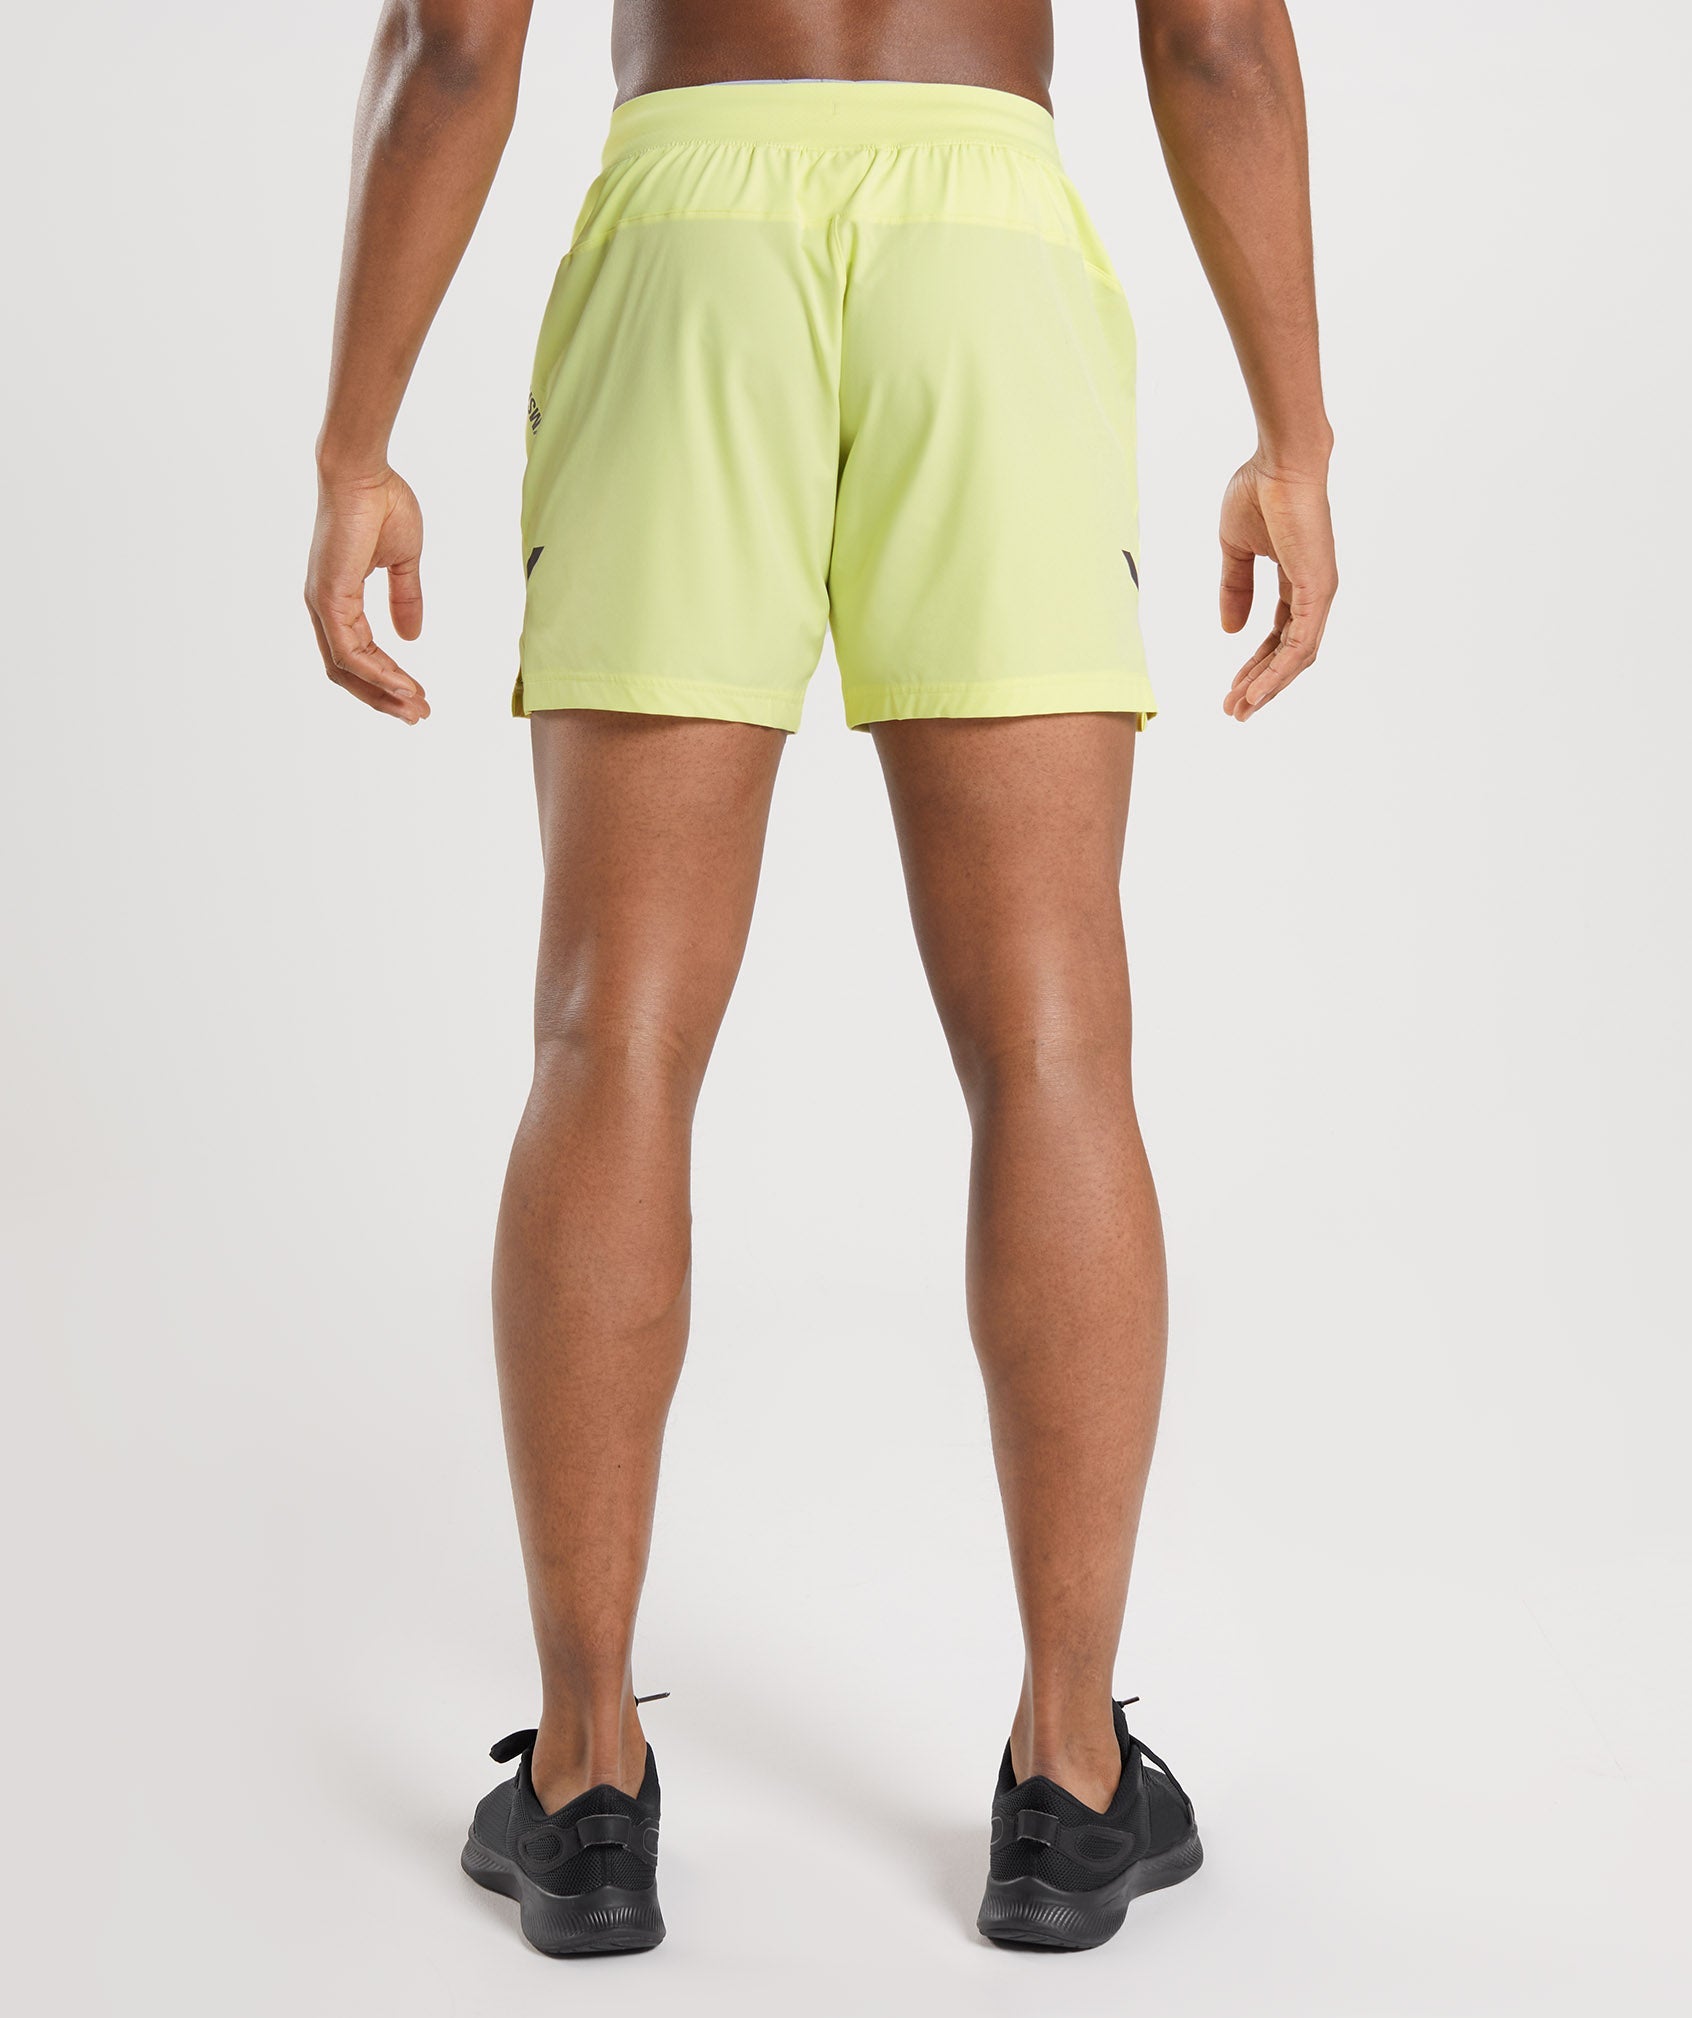 Apex 5" Perform Shorts in Firefly Green